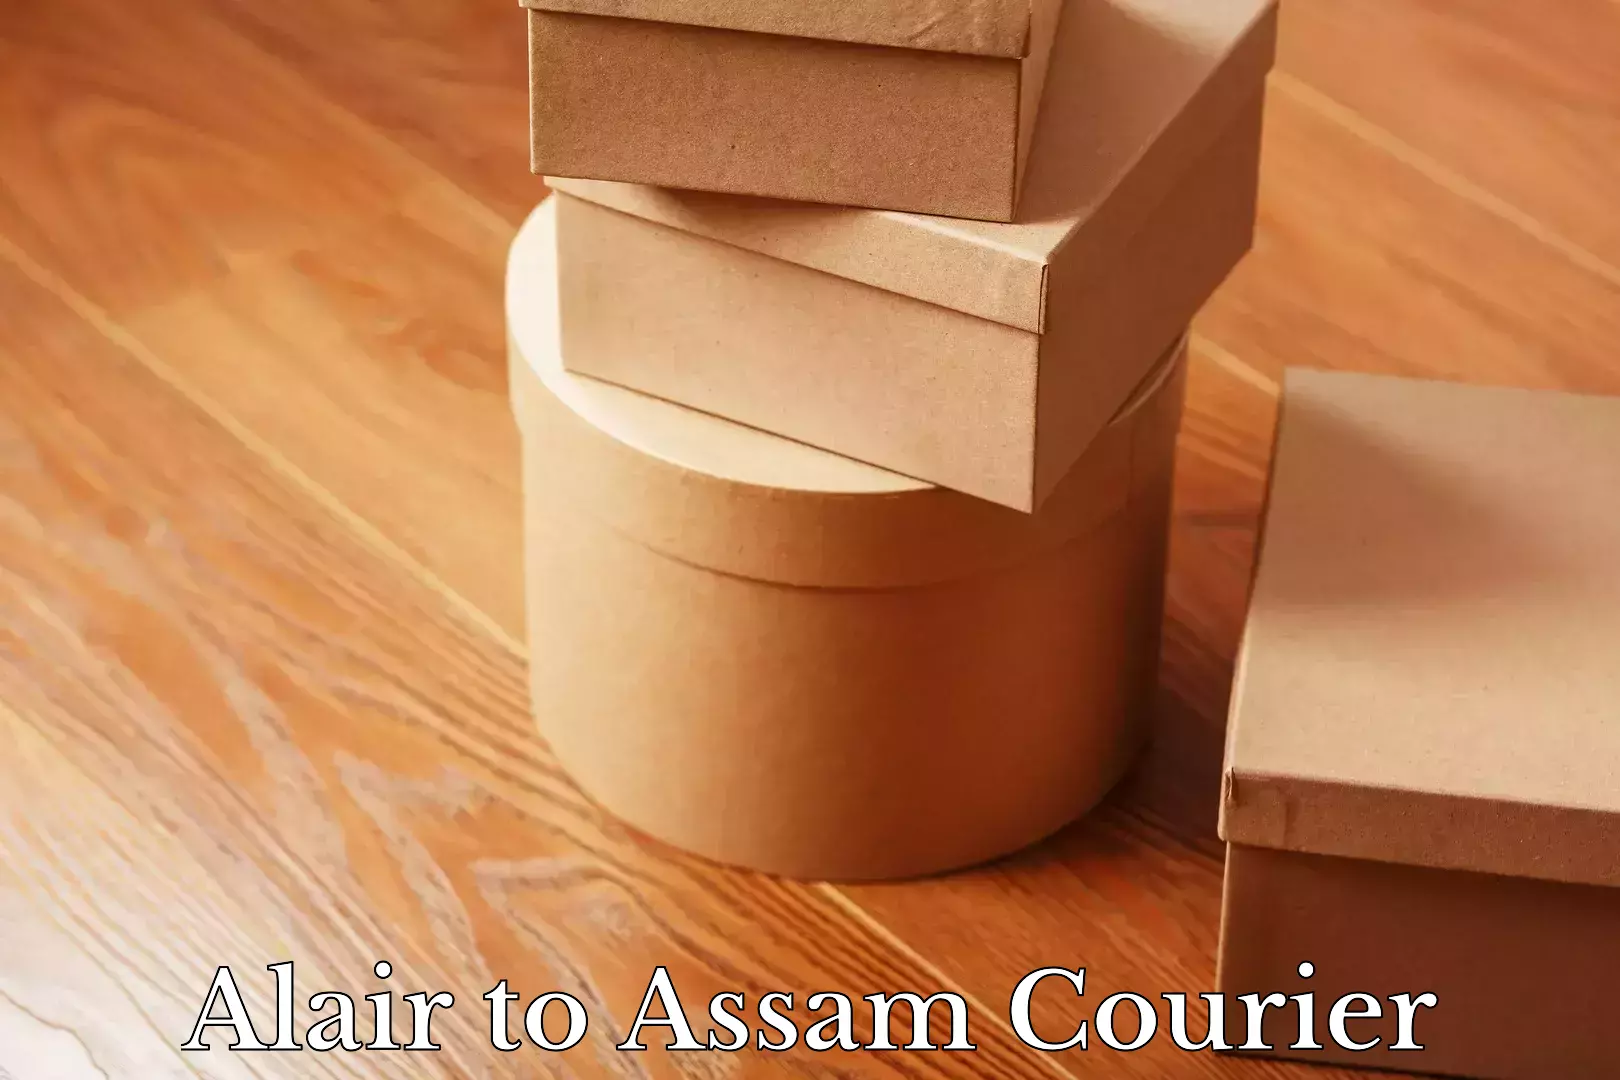 Courier service innovation Alair to Assam